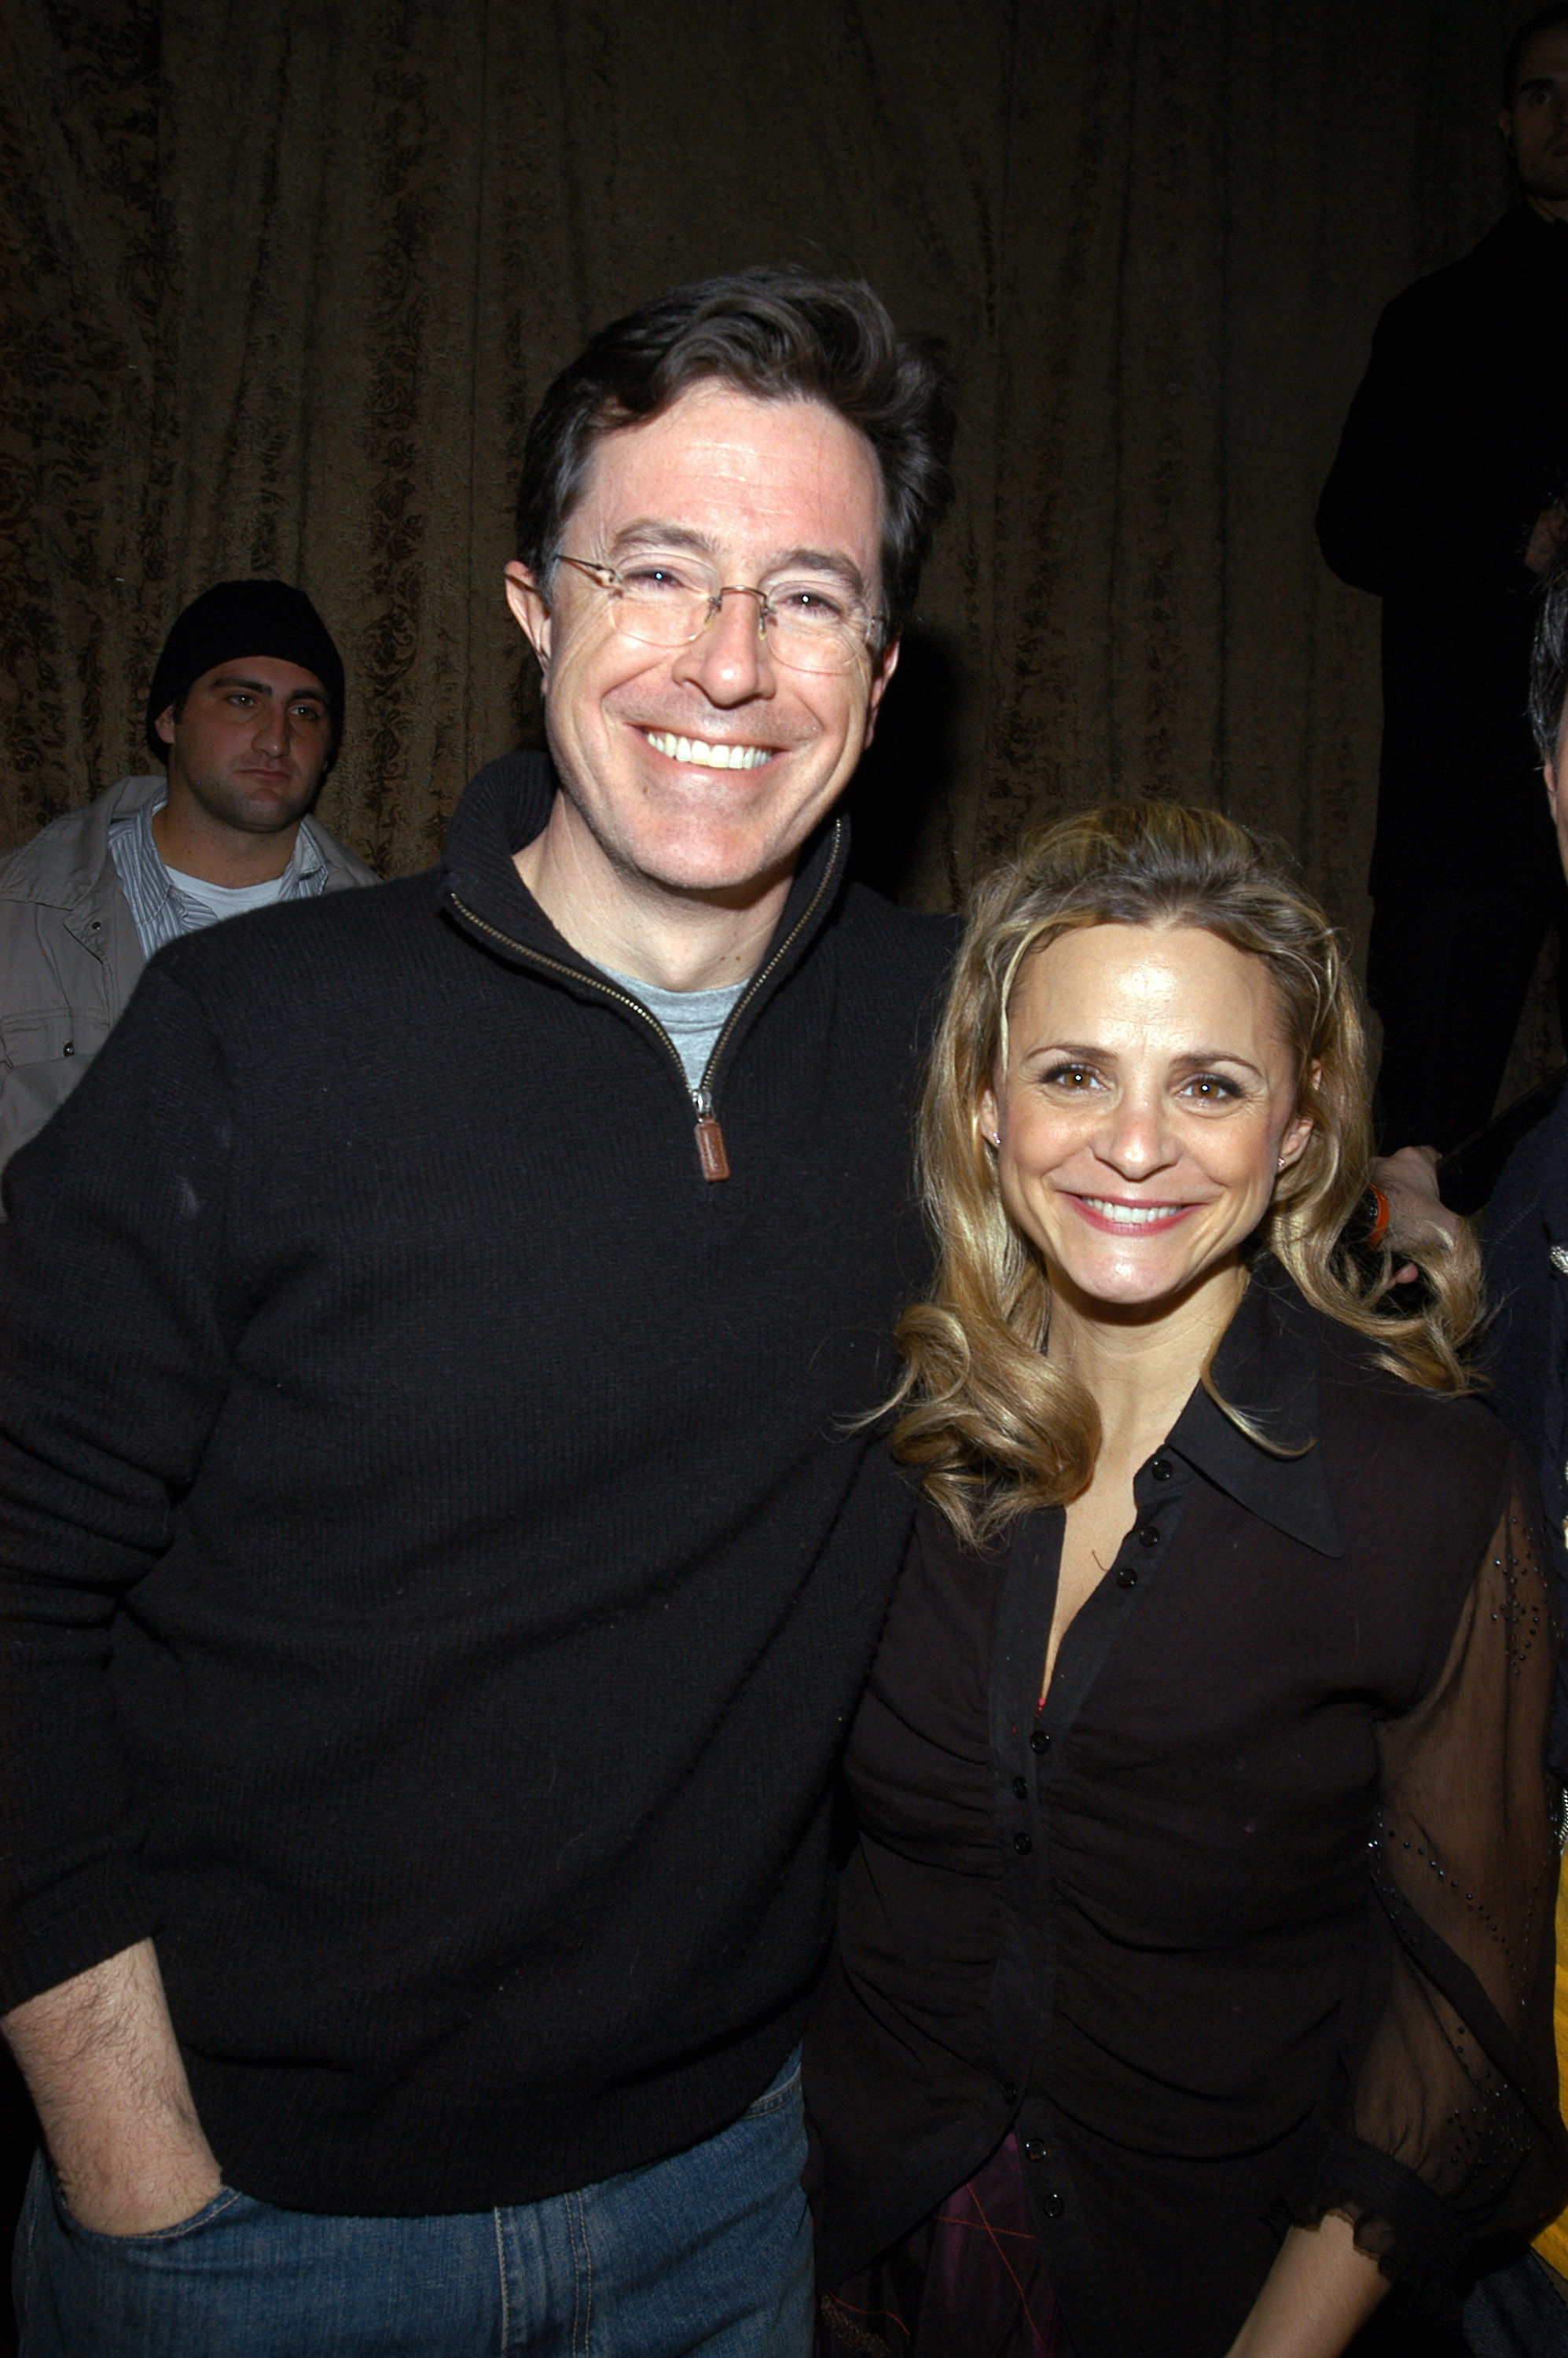 Stephen Colbert and Amy Sedaris during 2005 Park City - "Strangers with Candy" Party at Monkey Bar in Park City, Utah, United States on January 24, 2005 | Source: Getty Images